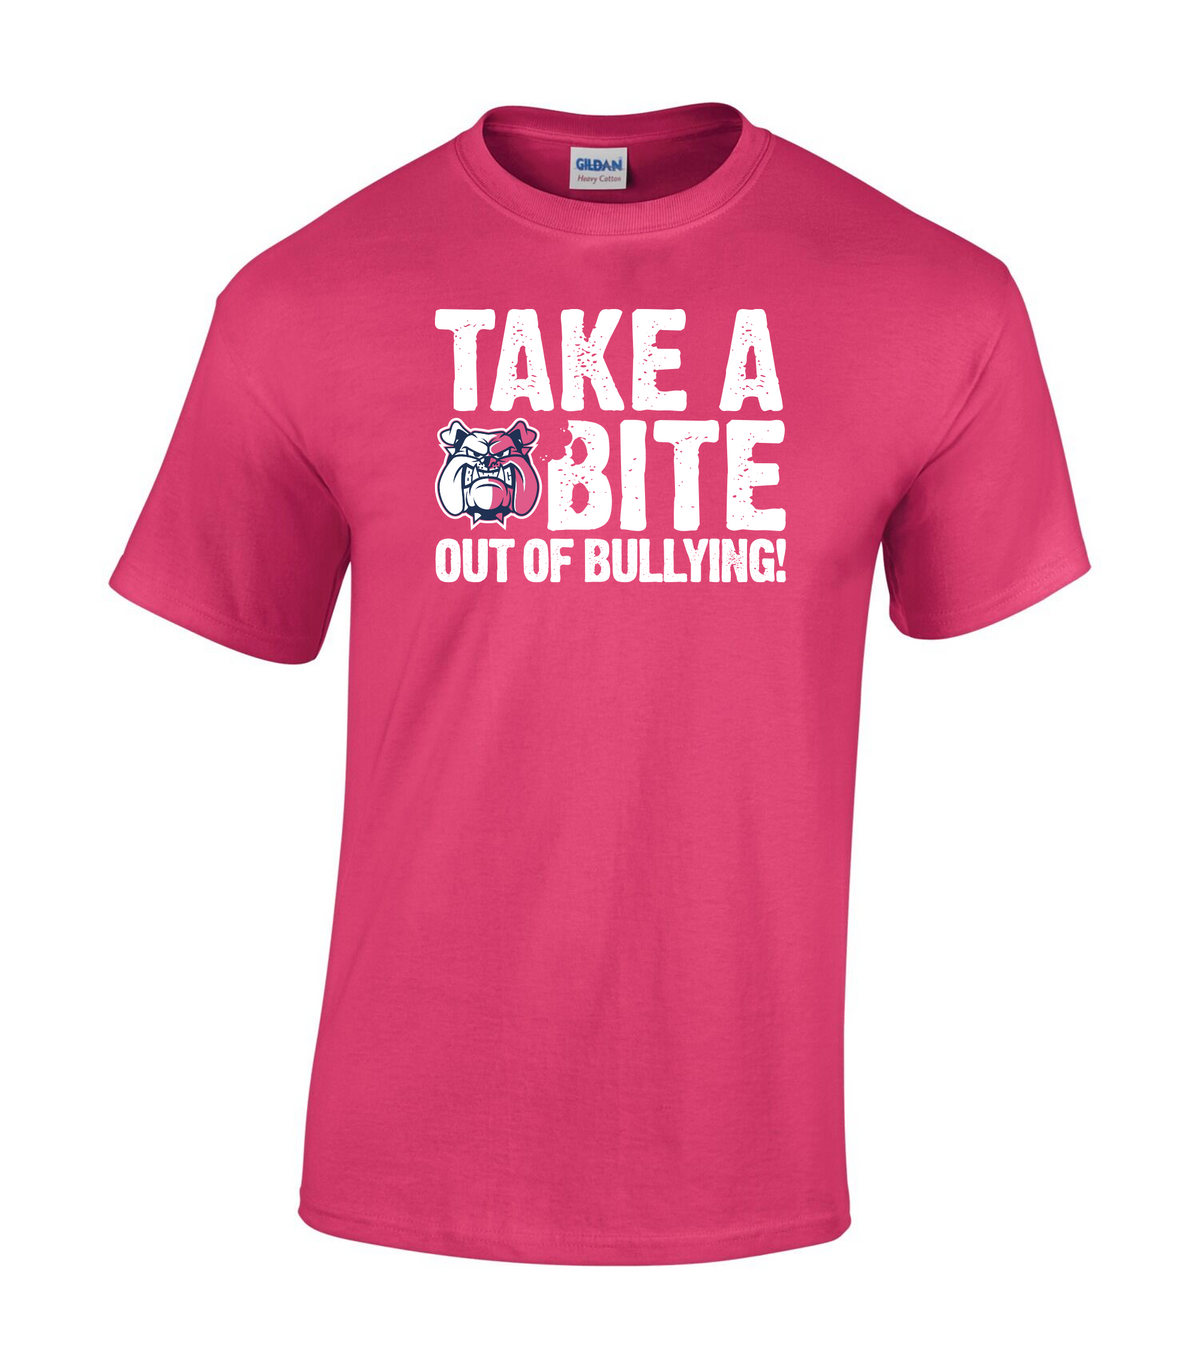 Take A Bite Out Of Bullying! Pink T-Shirt